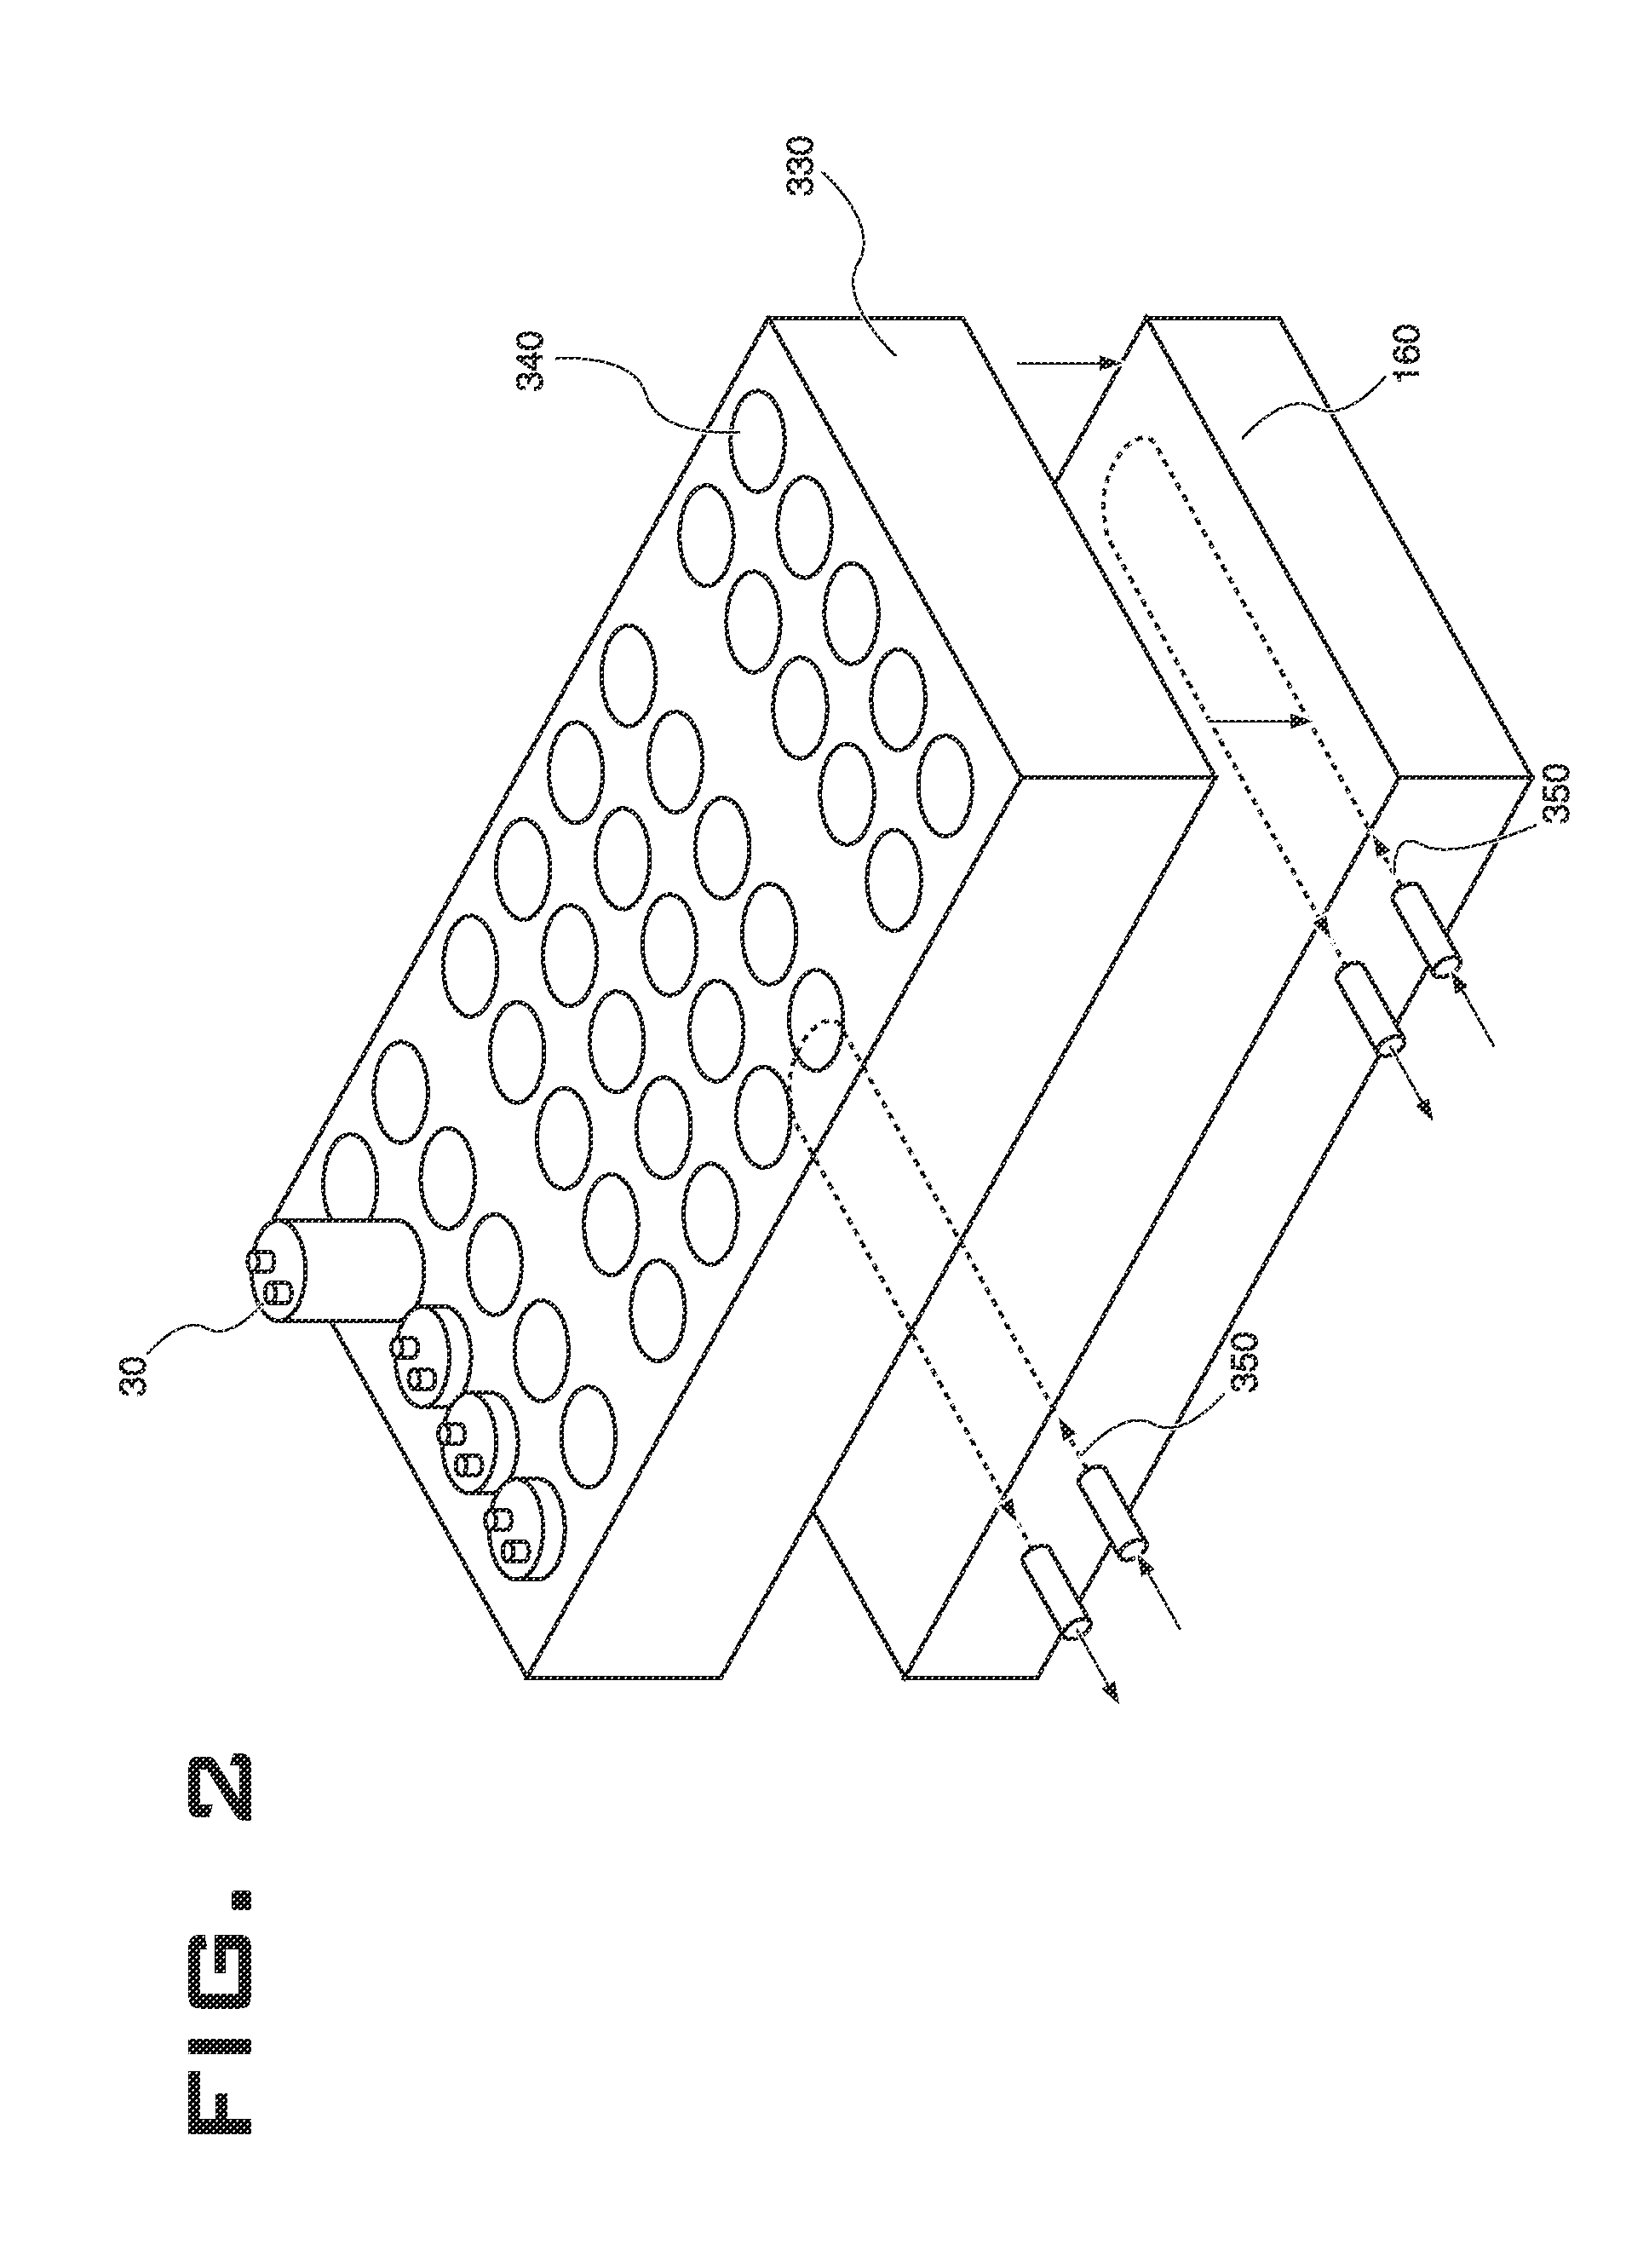 Active and passive cooling for an energy storage module